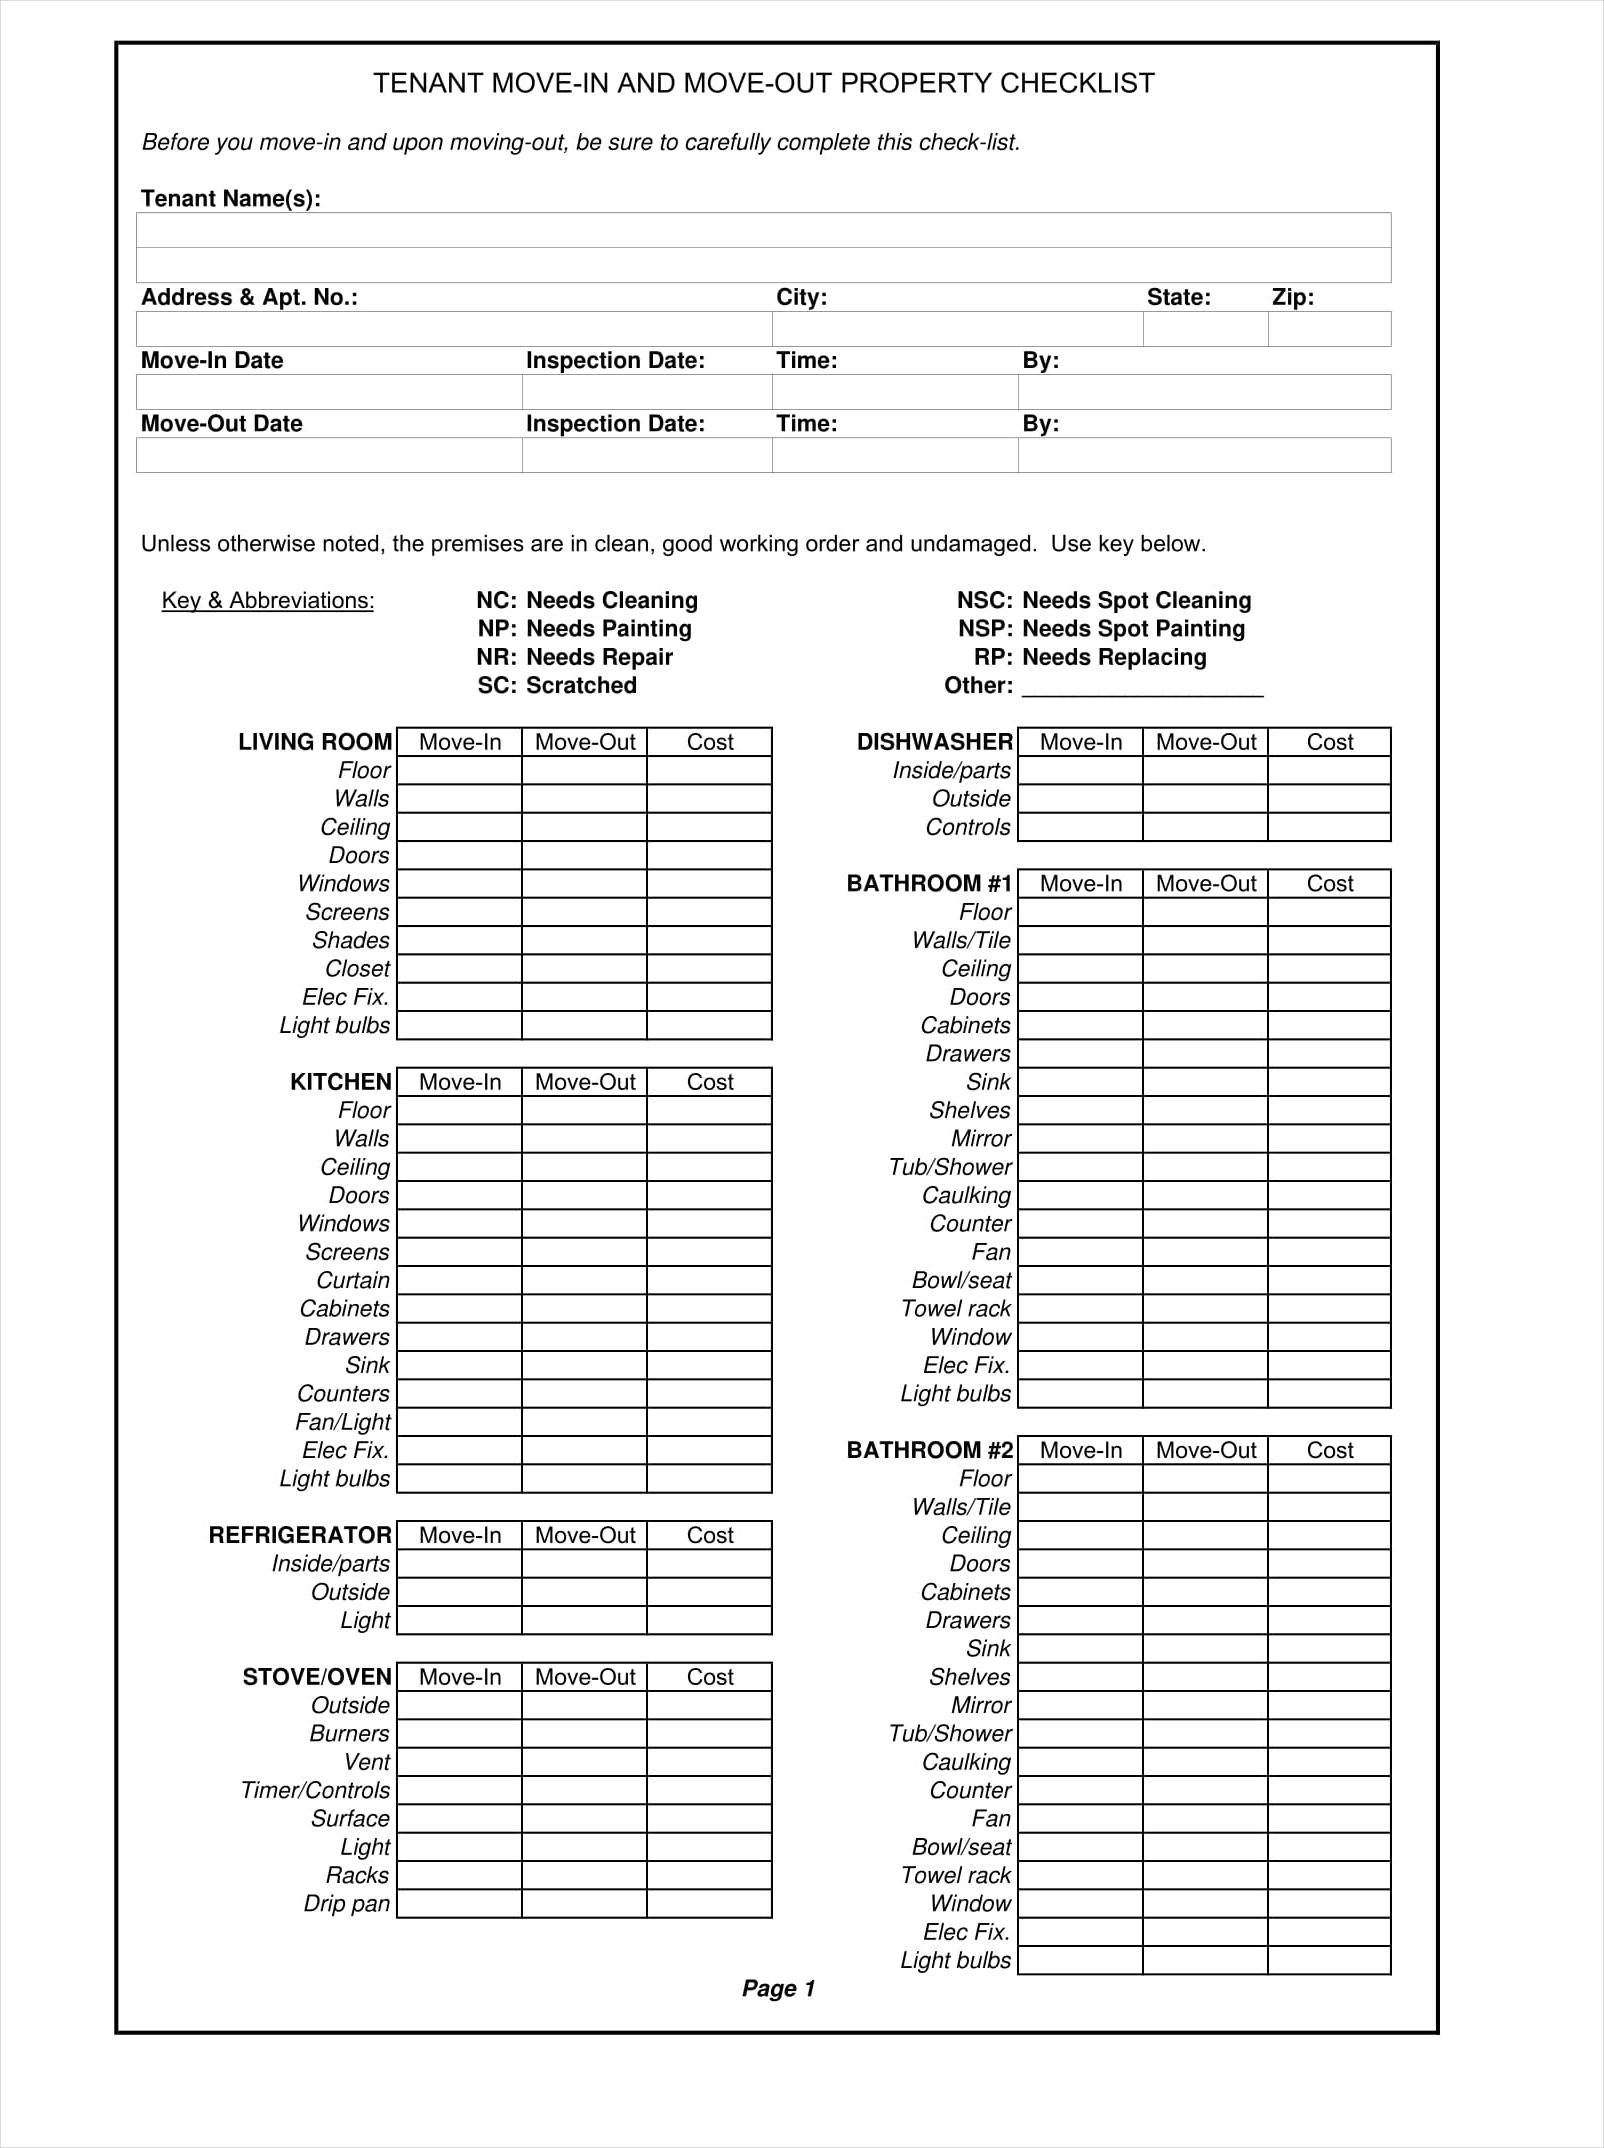 11+ Rental Checklist Examples - PDF  Examples In Rental Inventory Checklist Template Within Rental Inventory Checklist Template